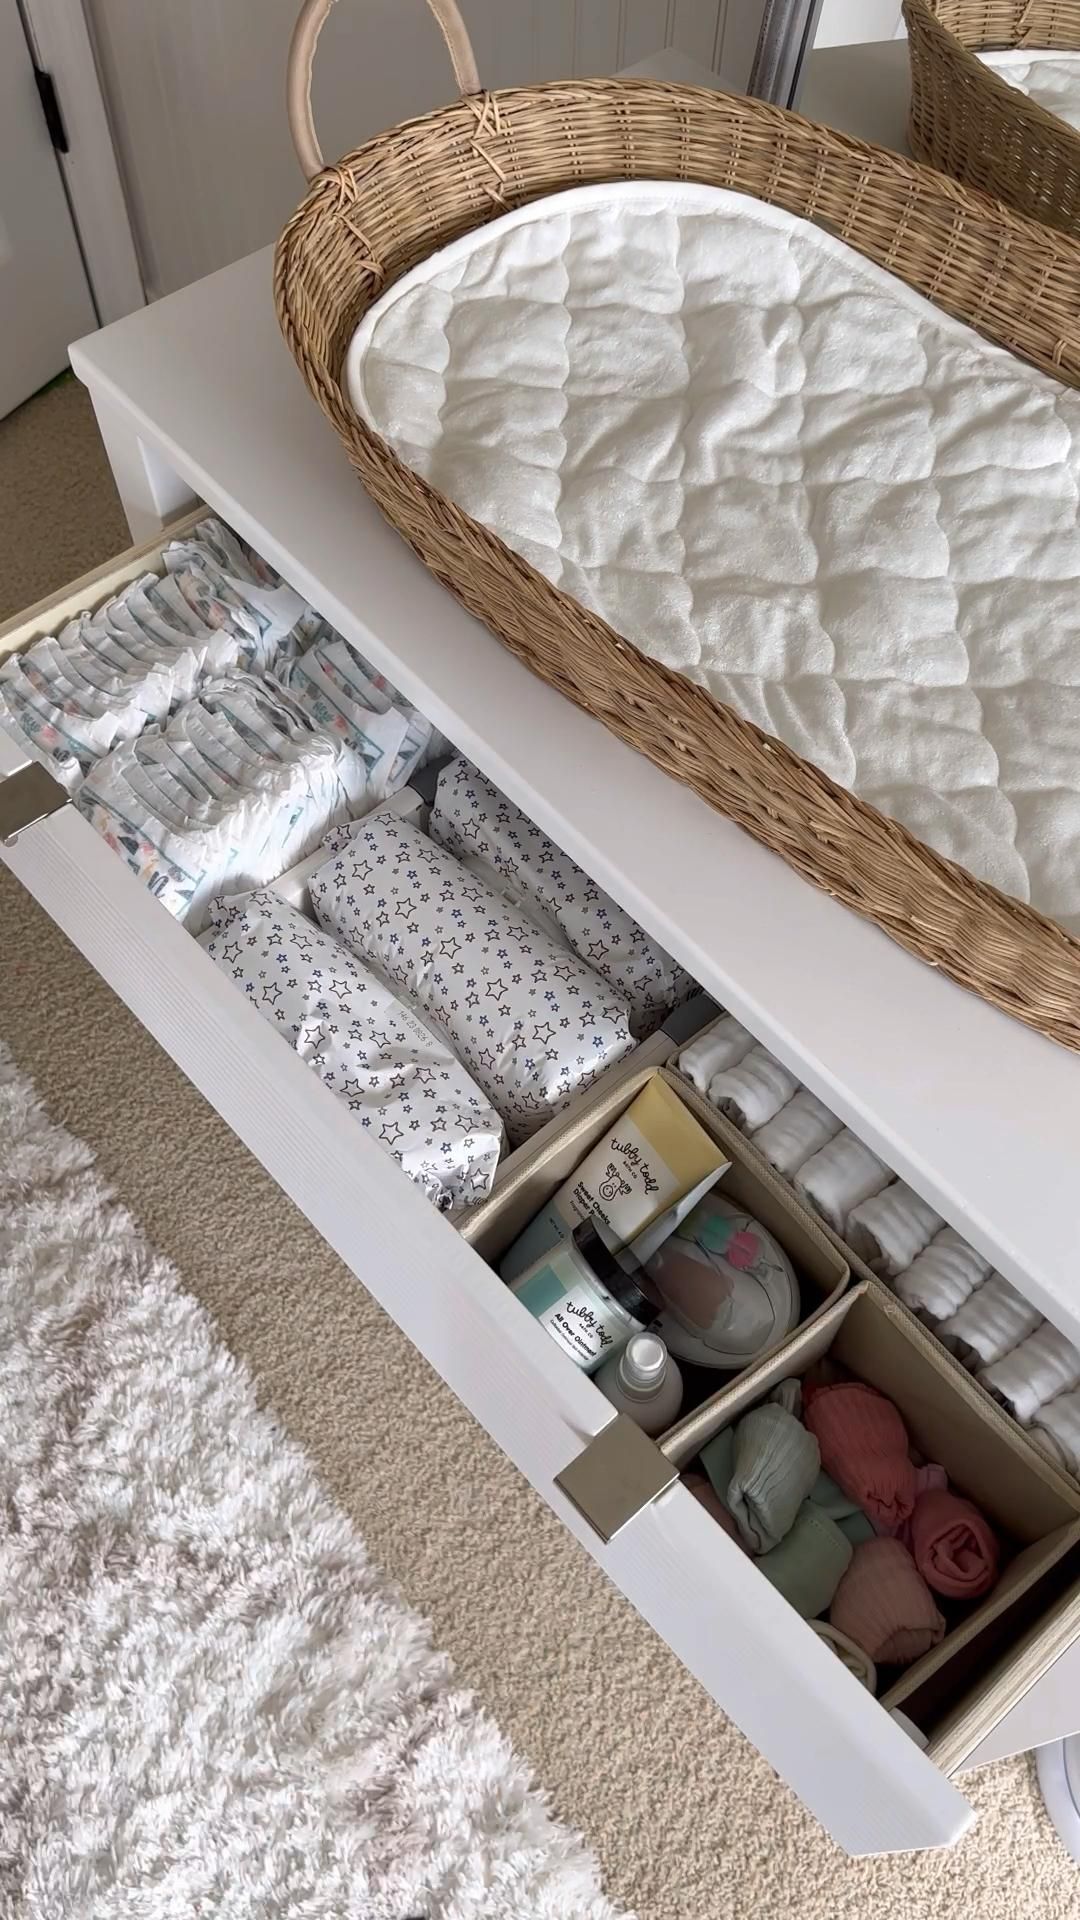 Complete your baby room look with baby
dresser